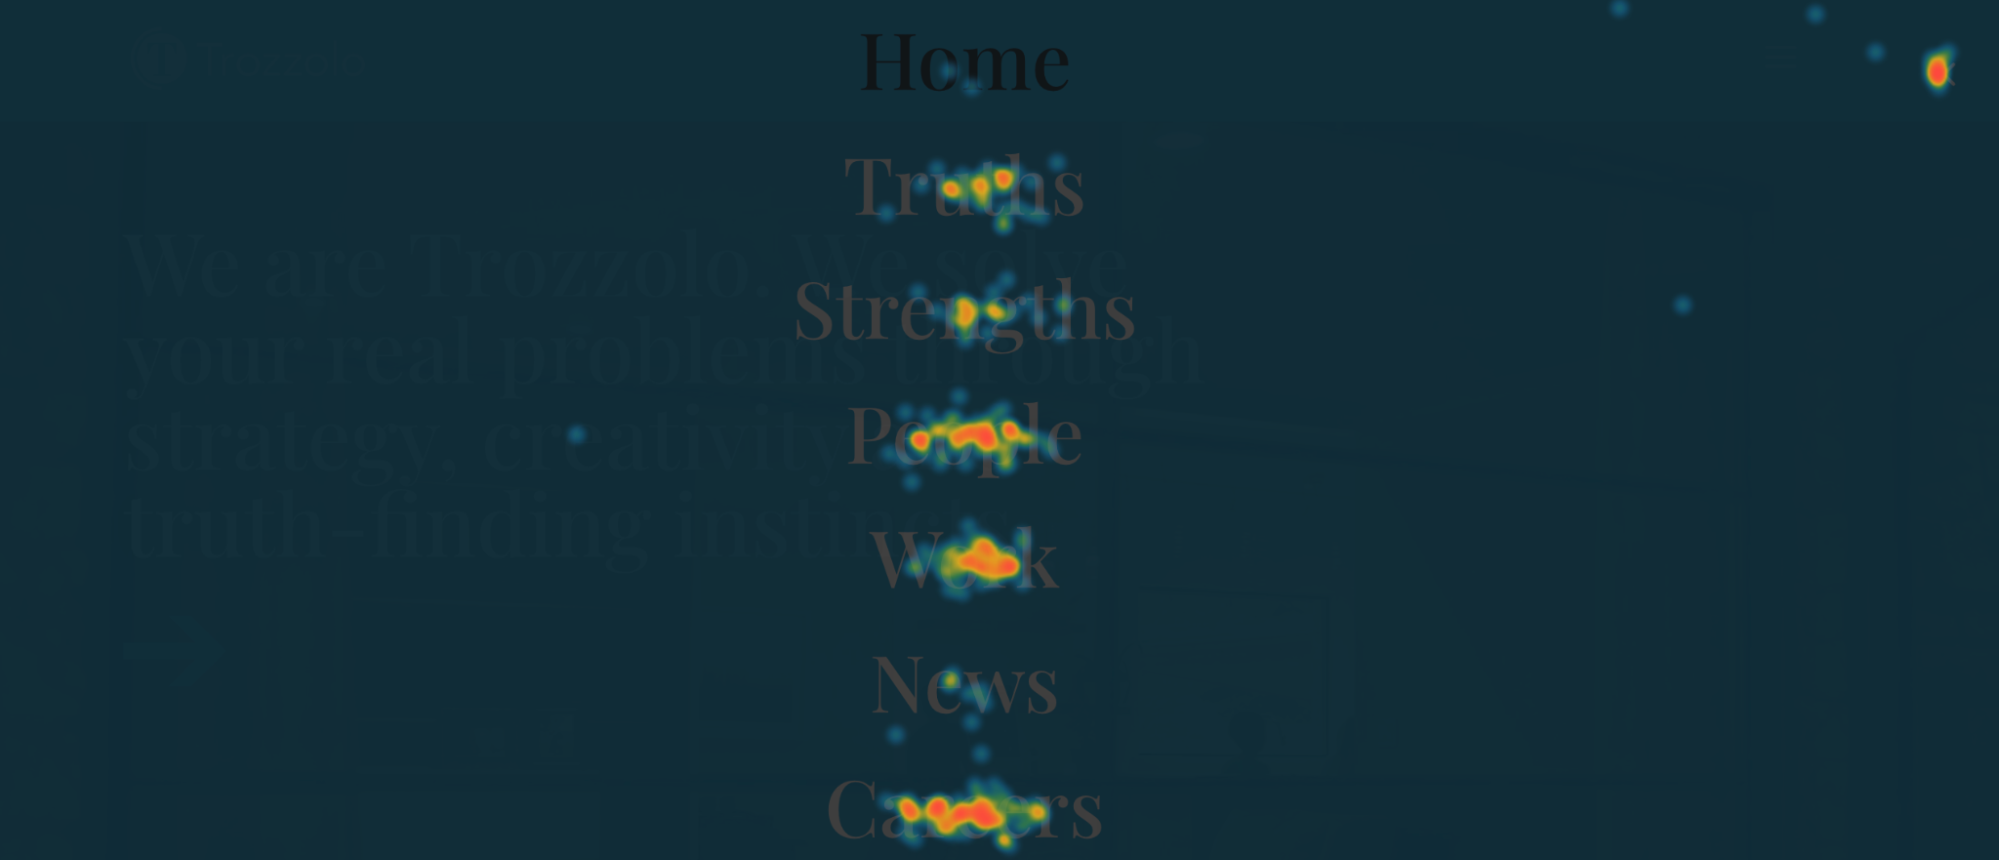 Visualize User Interaction With A Heatmap